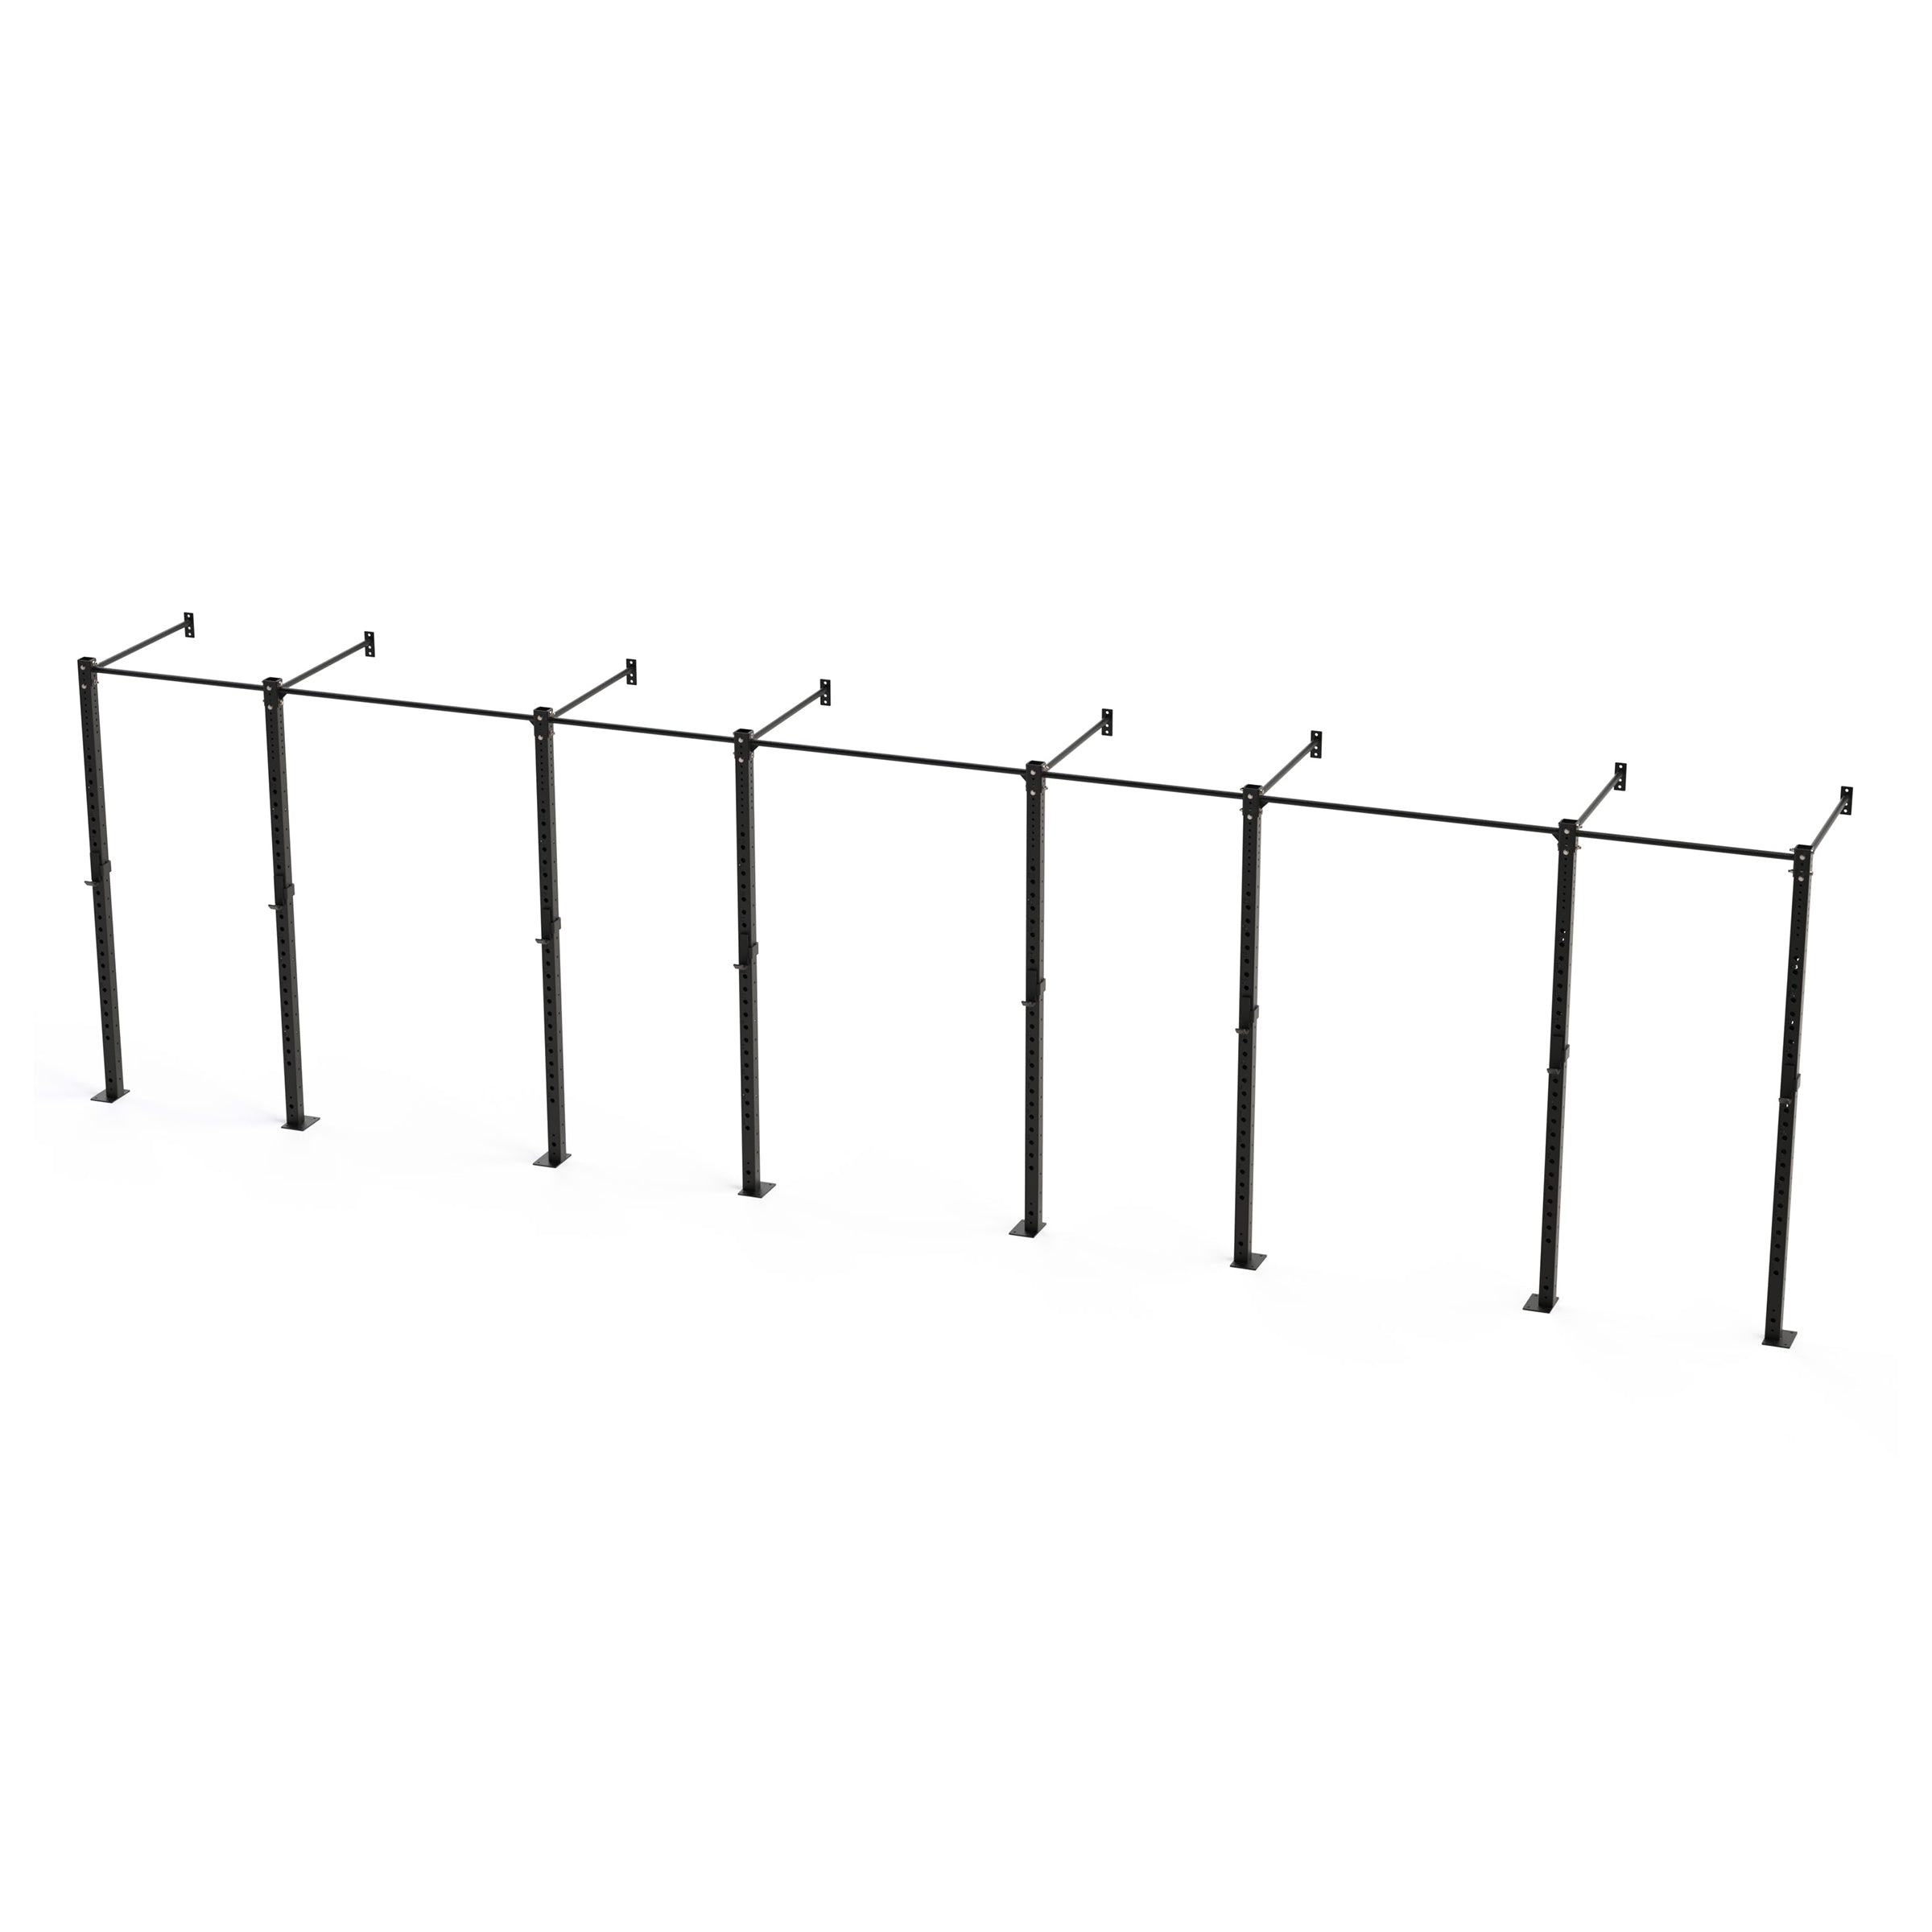 Bison Series - 4 Bay Wall Mounted Rig - Wolverson Fitness